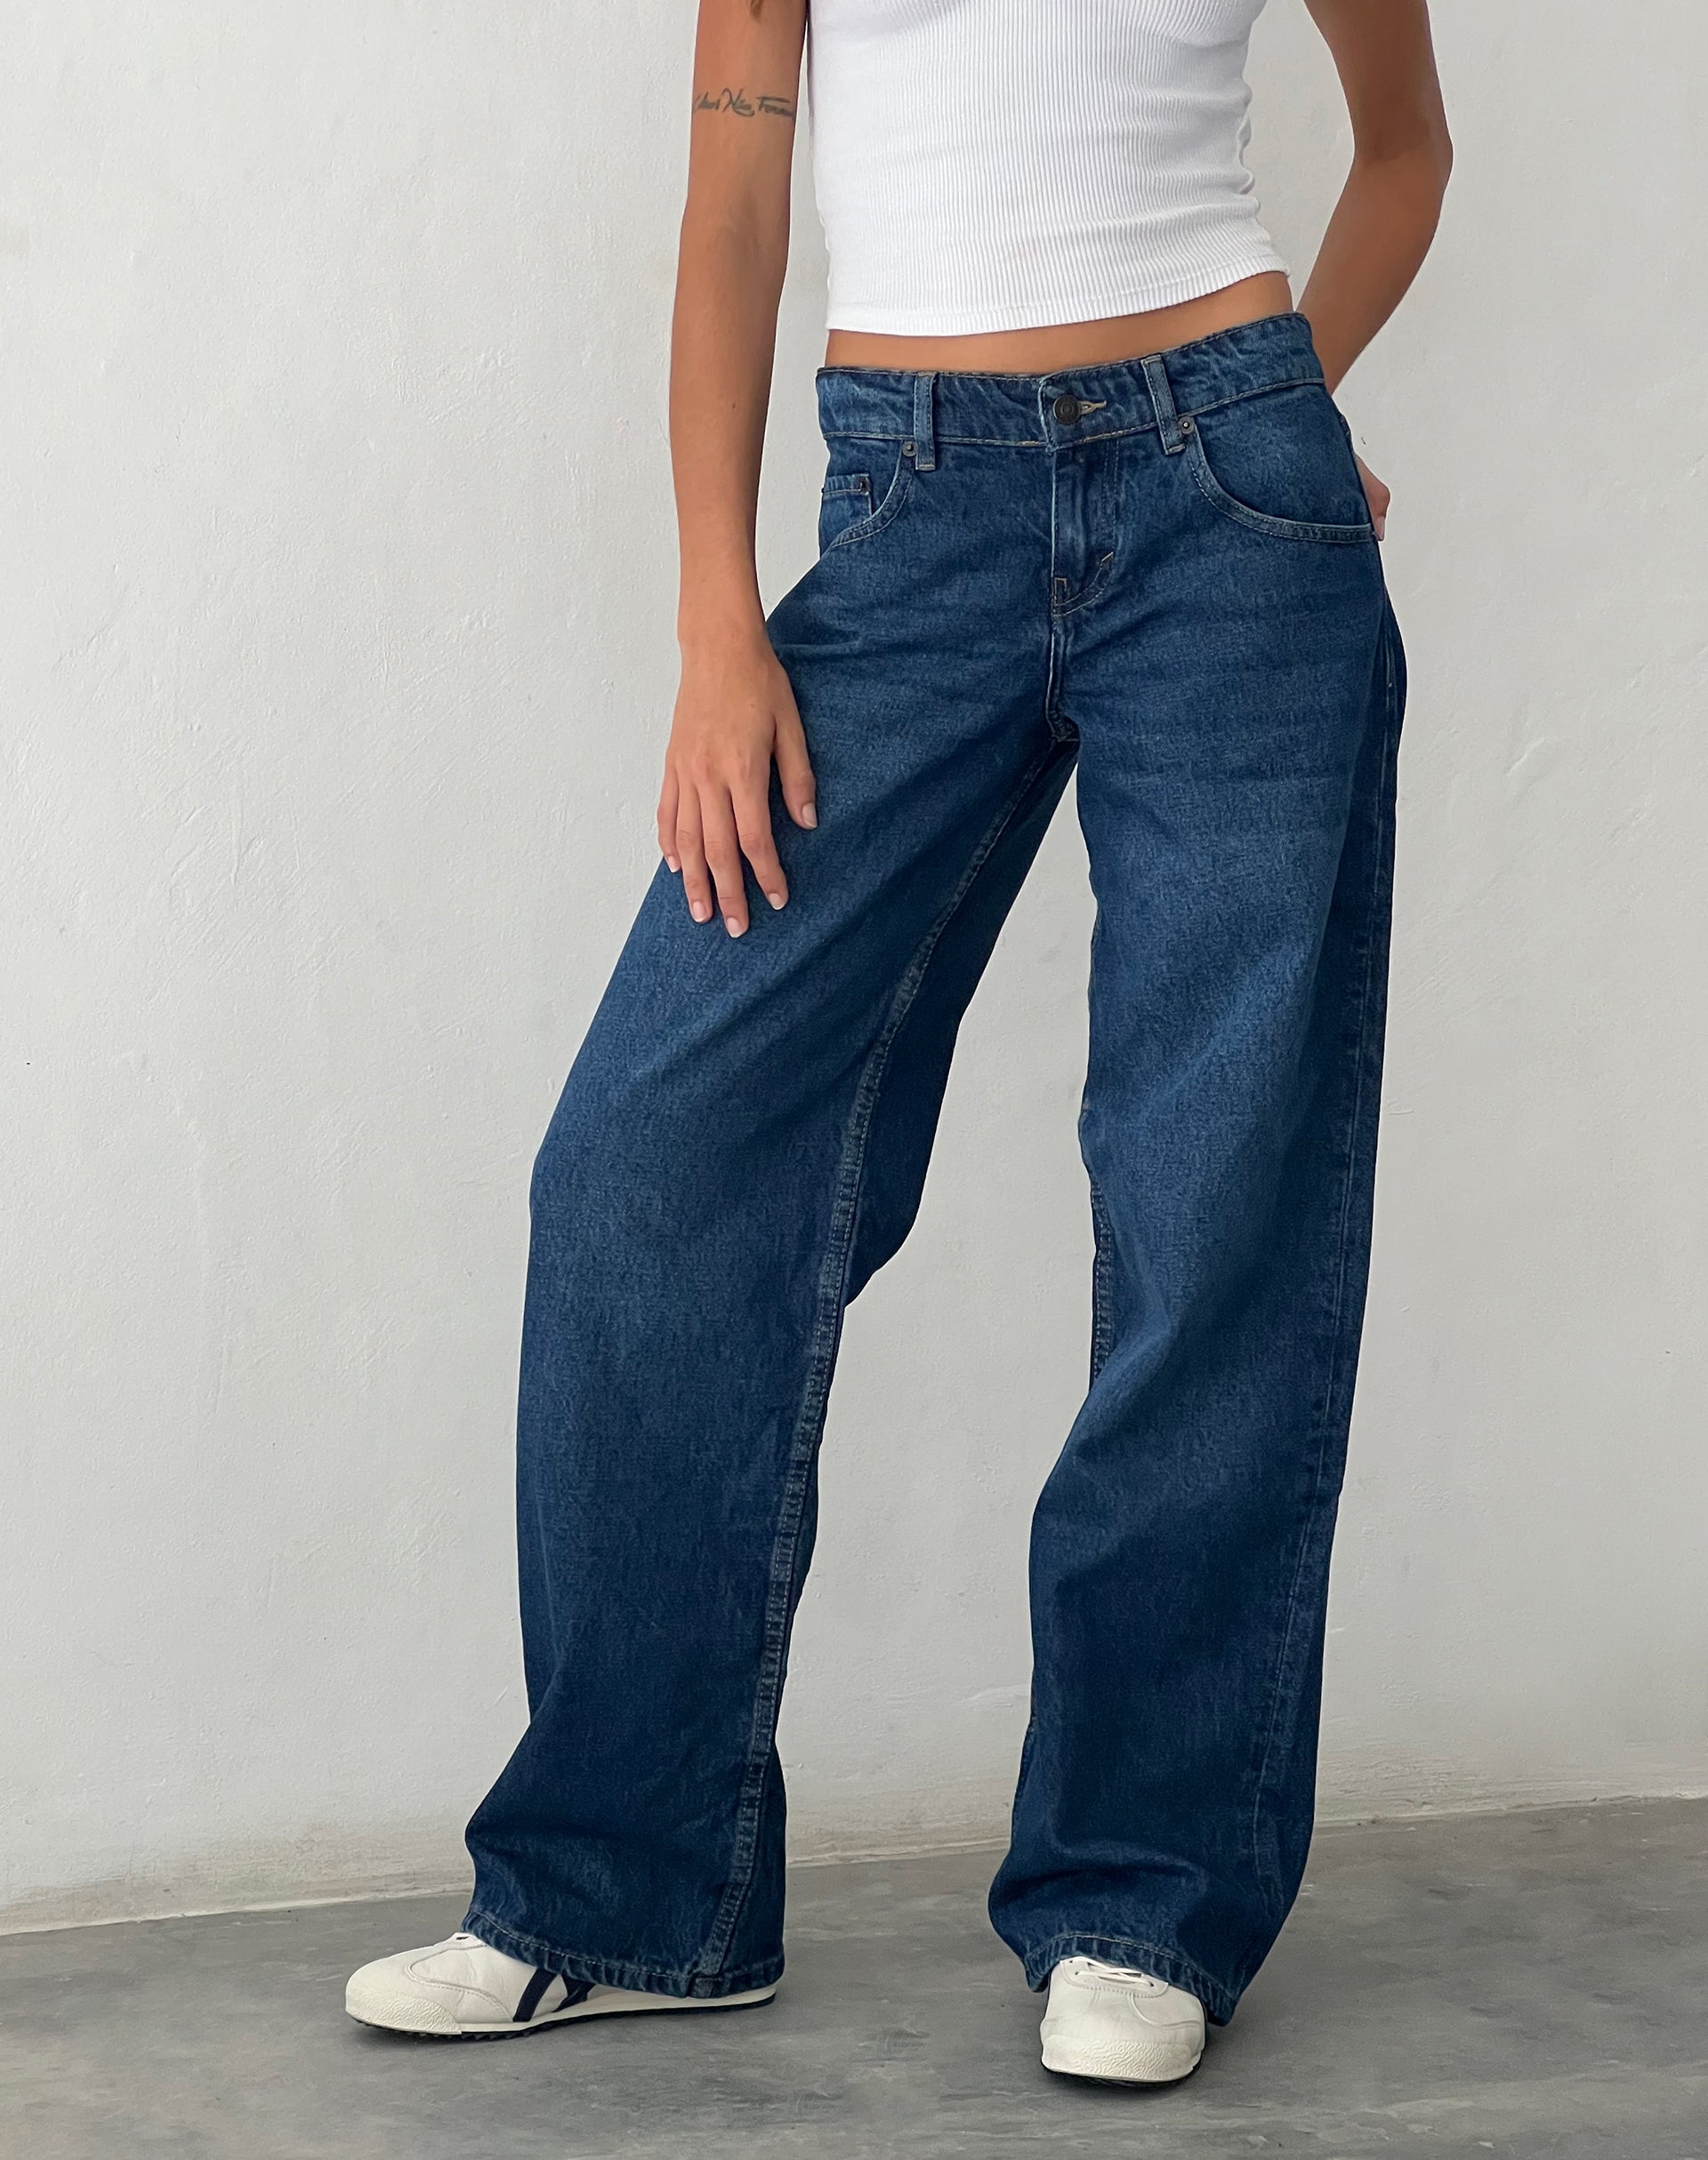 image of Low Rise Parallel Jeans in Mid Blue Used